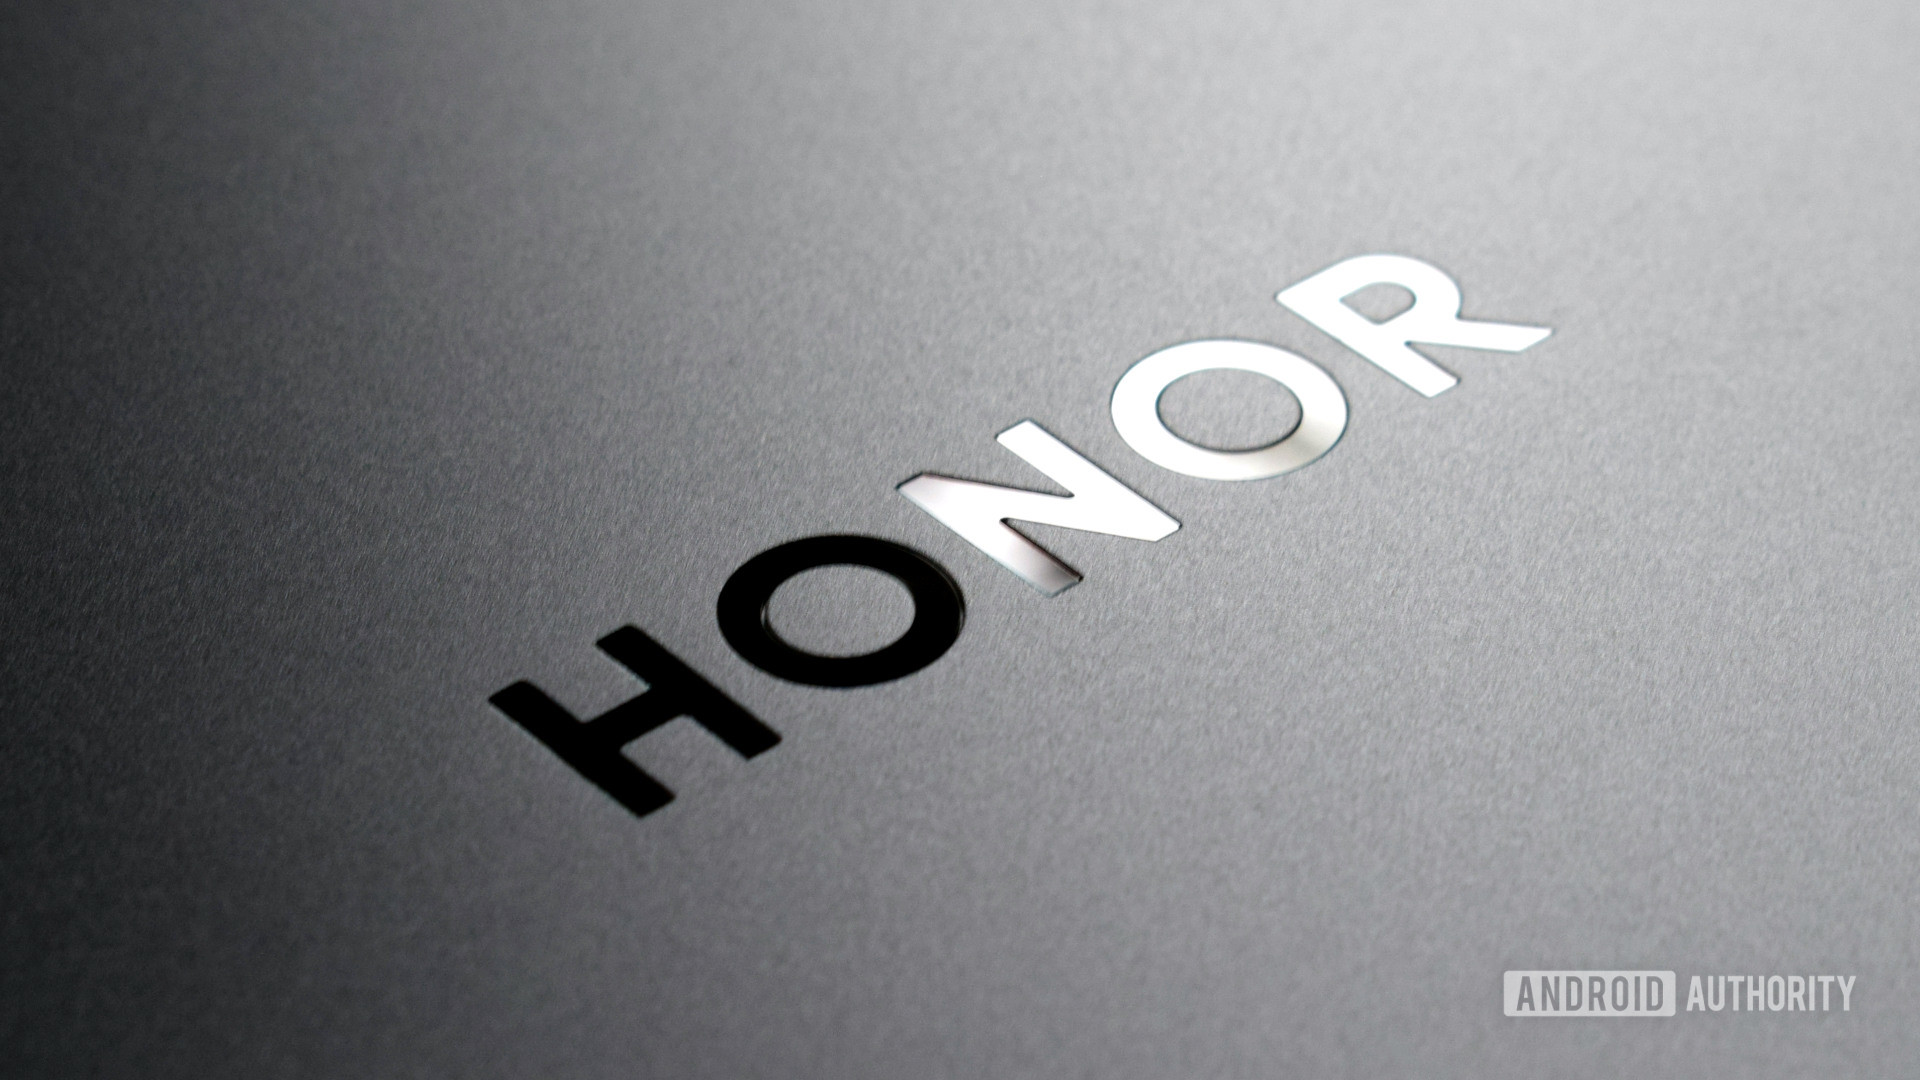 US might put HONOR on Entity List for unknown reasons - Android Authority